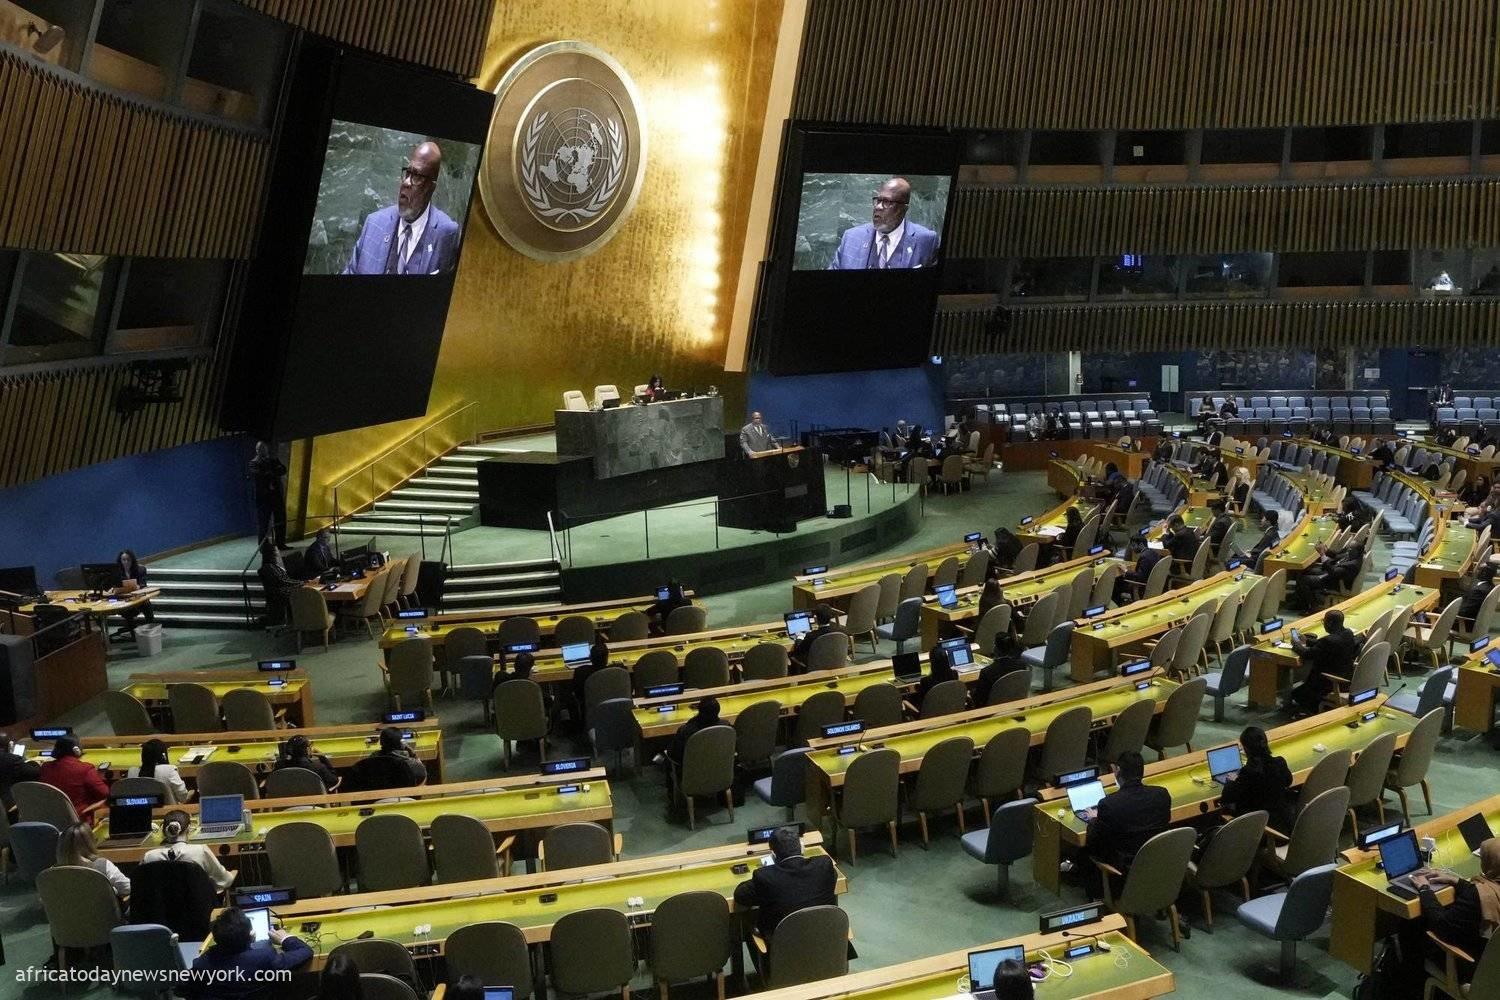 UN General Assembly Convenes On Tuesday To Discuss Gaza